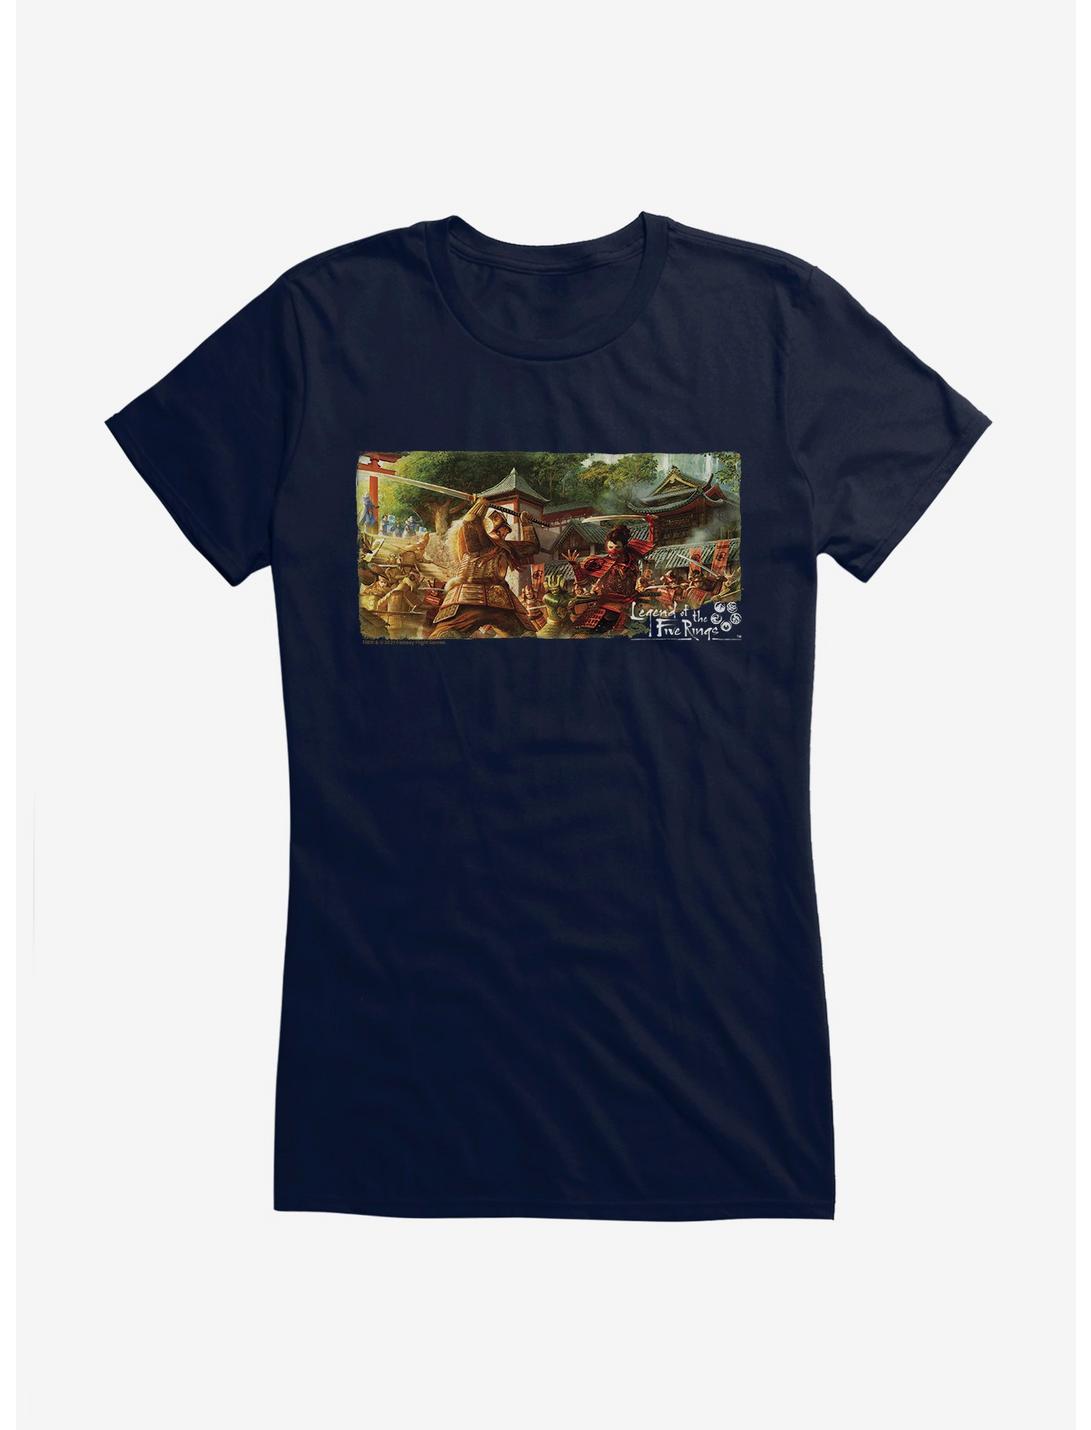 Legend Of The Five Rings Army Battle Girls T-Shirt , NAVY, hi-res